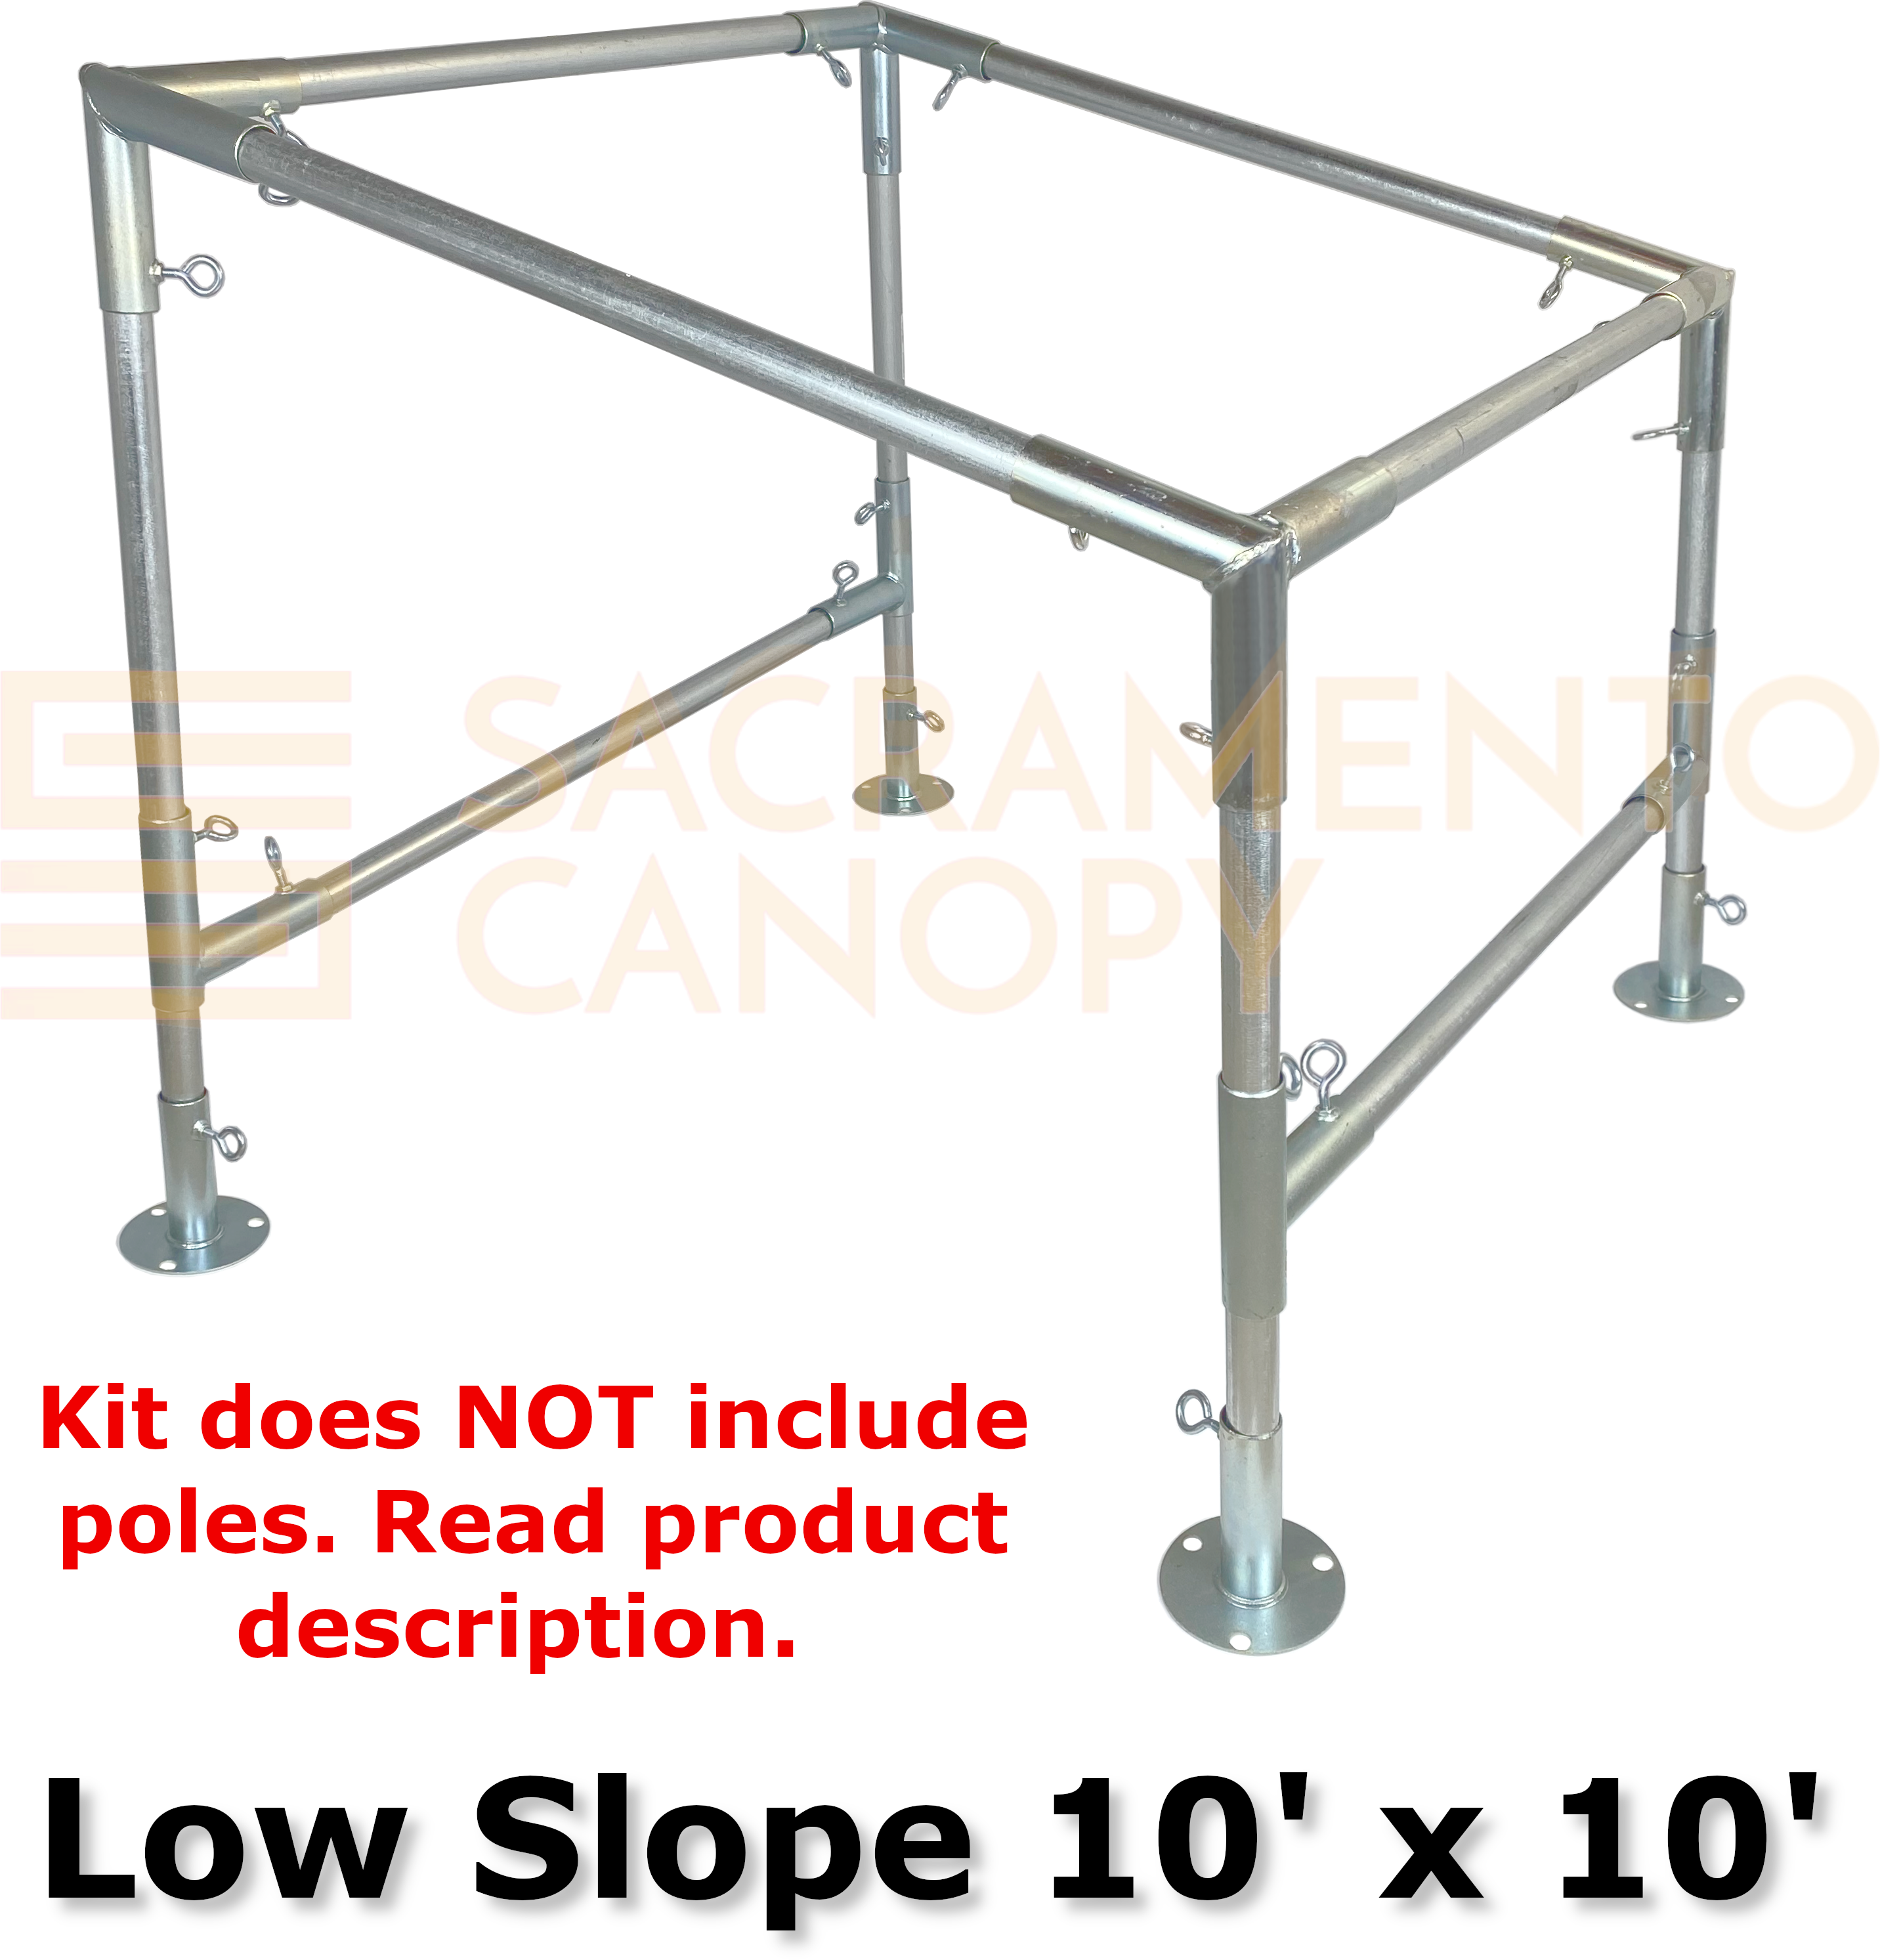 Slope Roof Canopy Fittings Kits (10' Wide) DIY Greenhouse, RV & Boat Carport, Shelter, Shade Structure, Vendor Booth, Tent, Steel Frame EMT Connector Parts, 1" - image 3 of 22